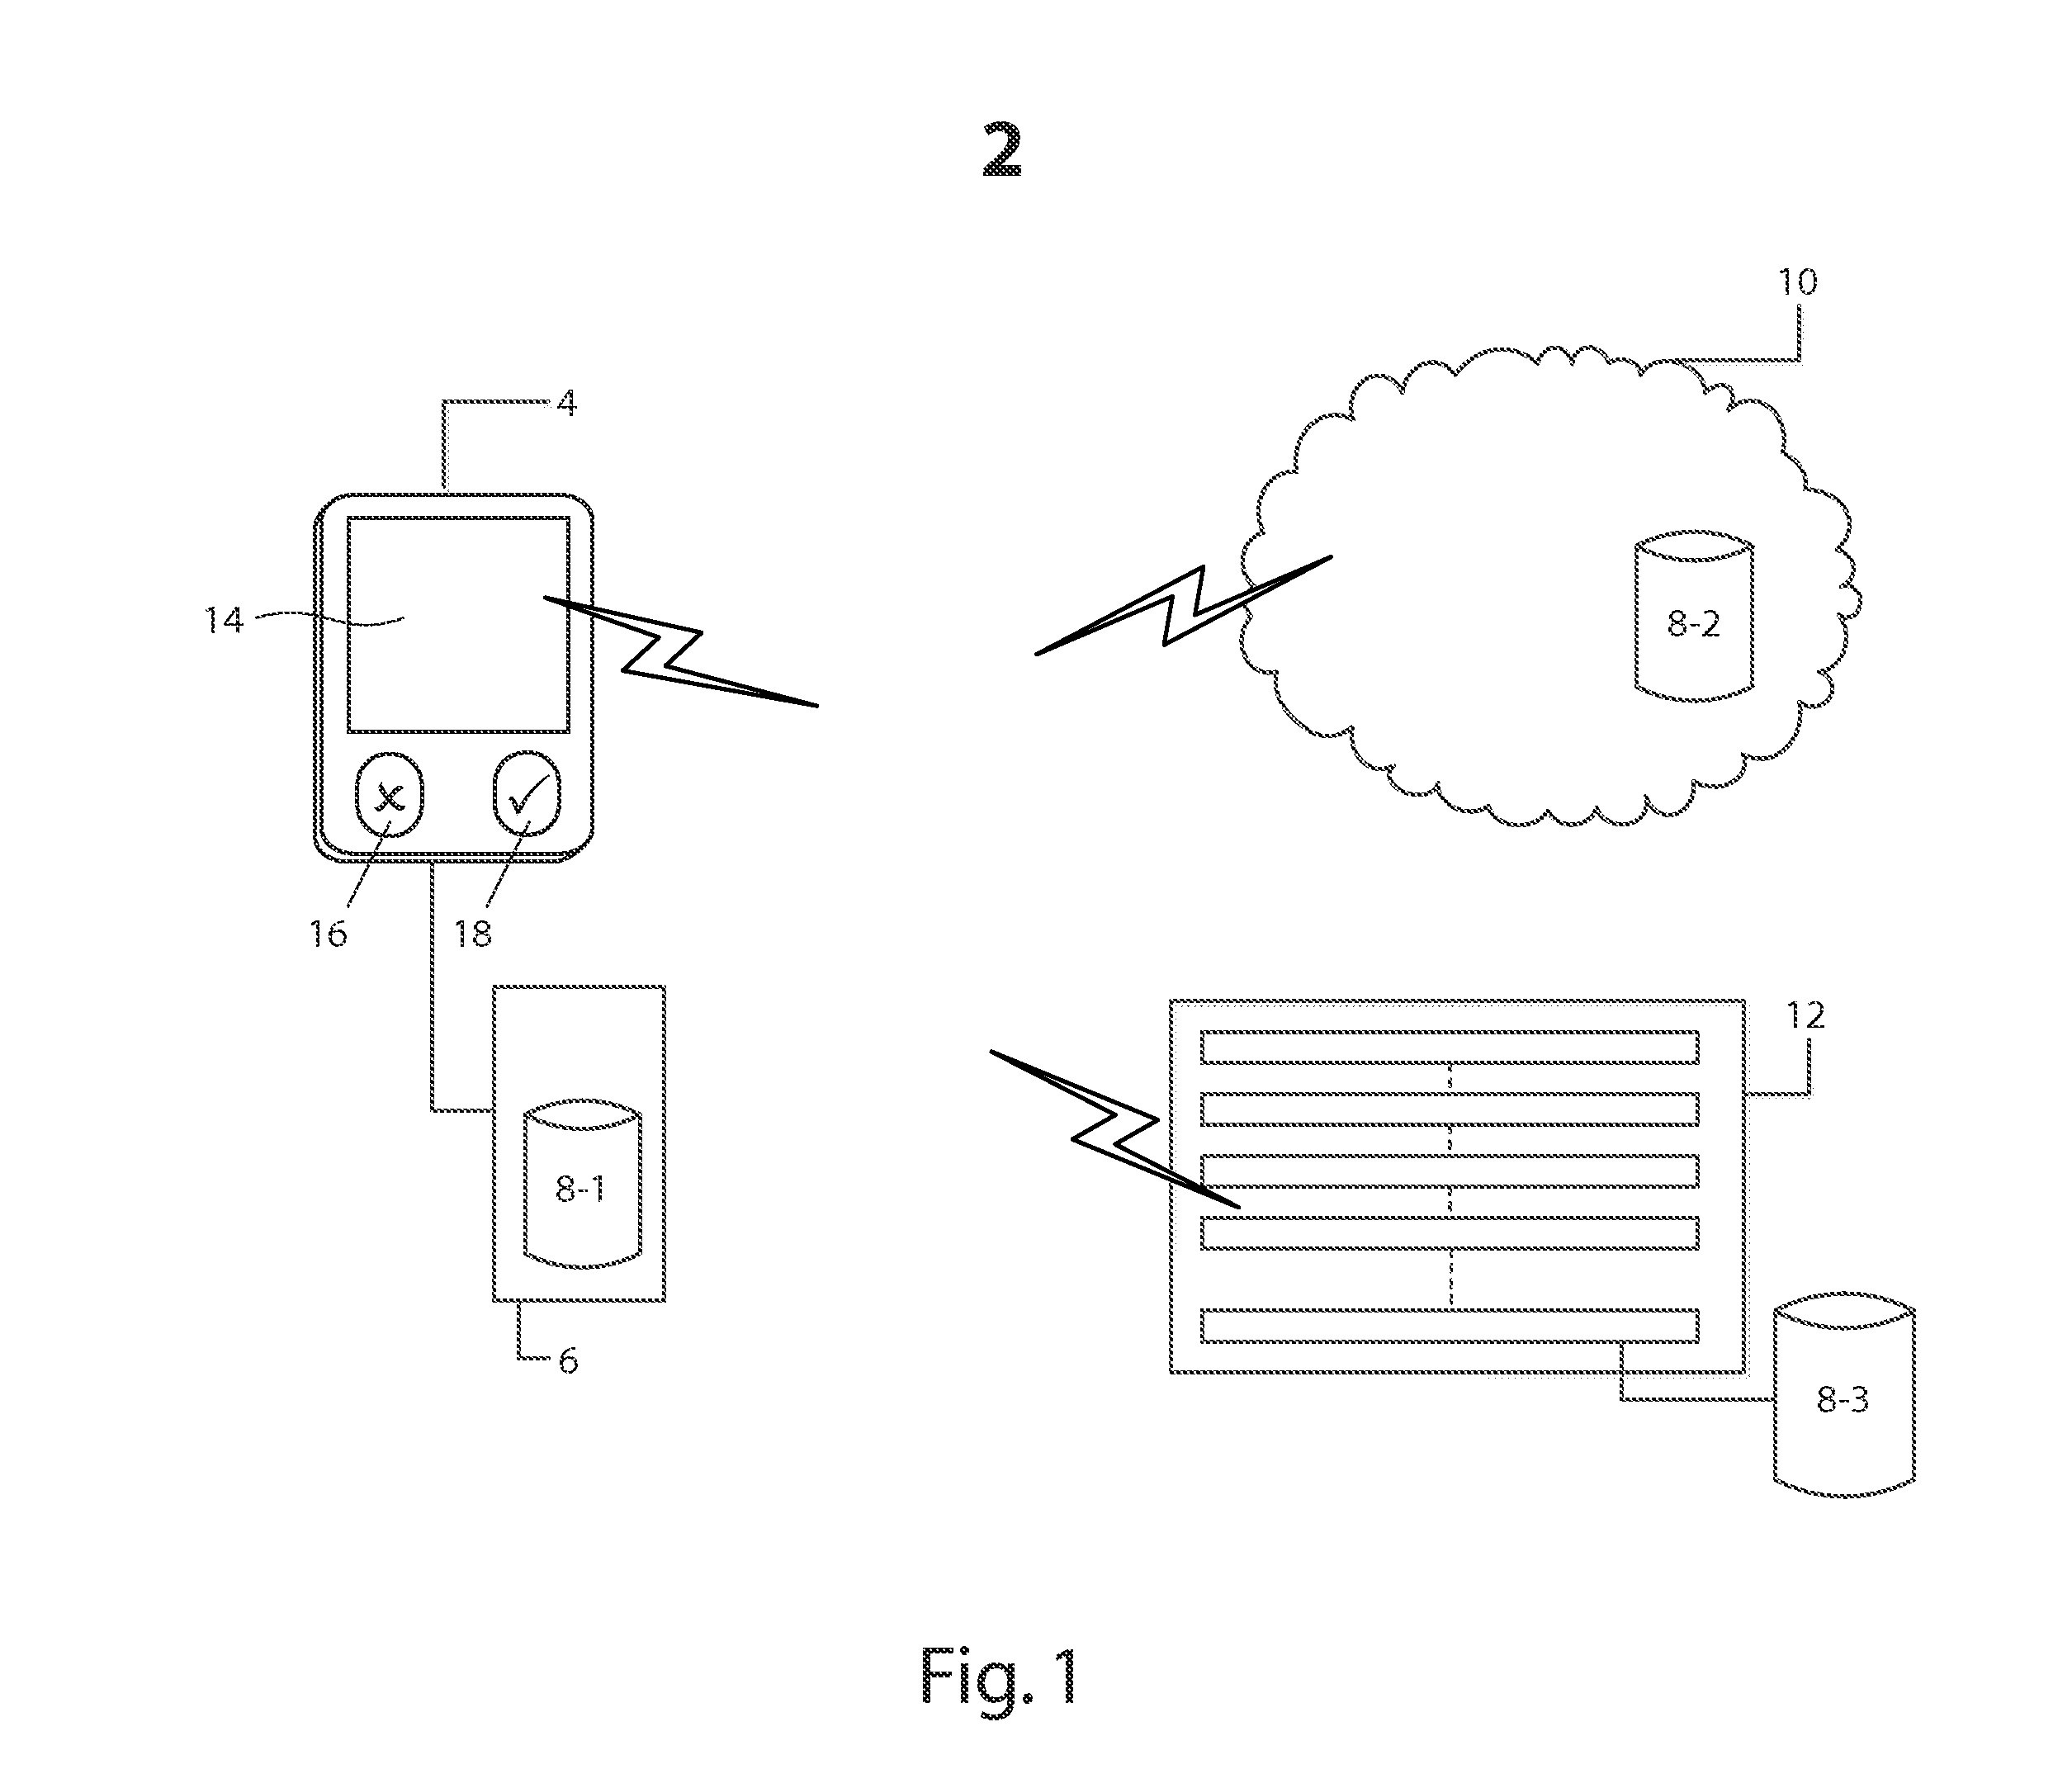 Apparatus, systems and methods for interactive dissemination of knowledge